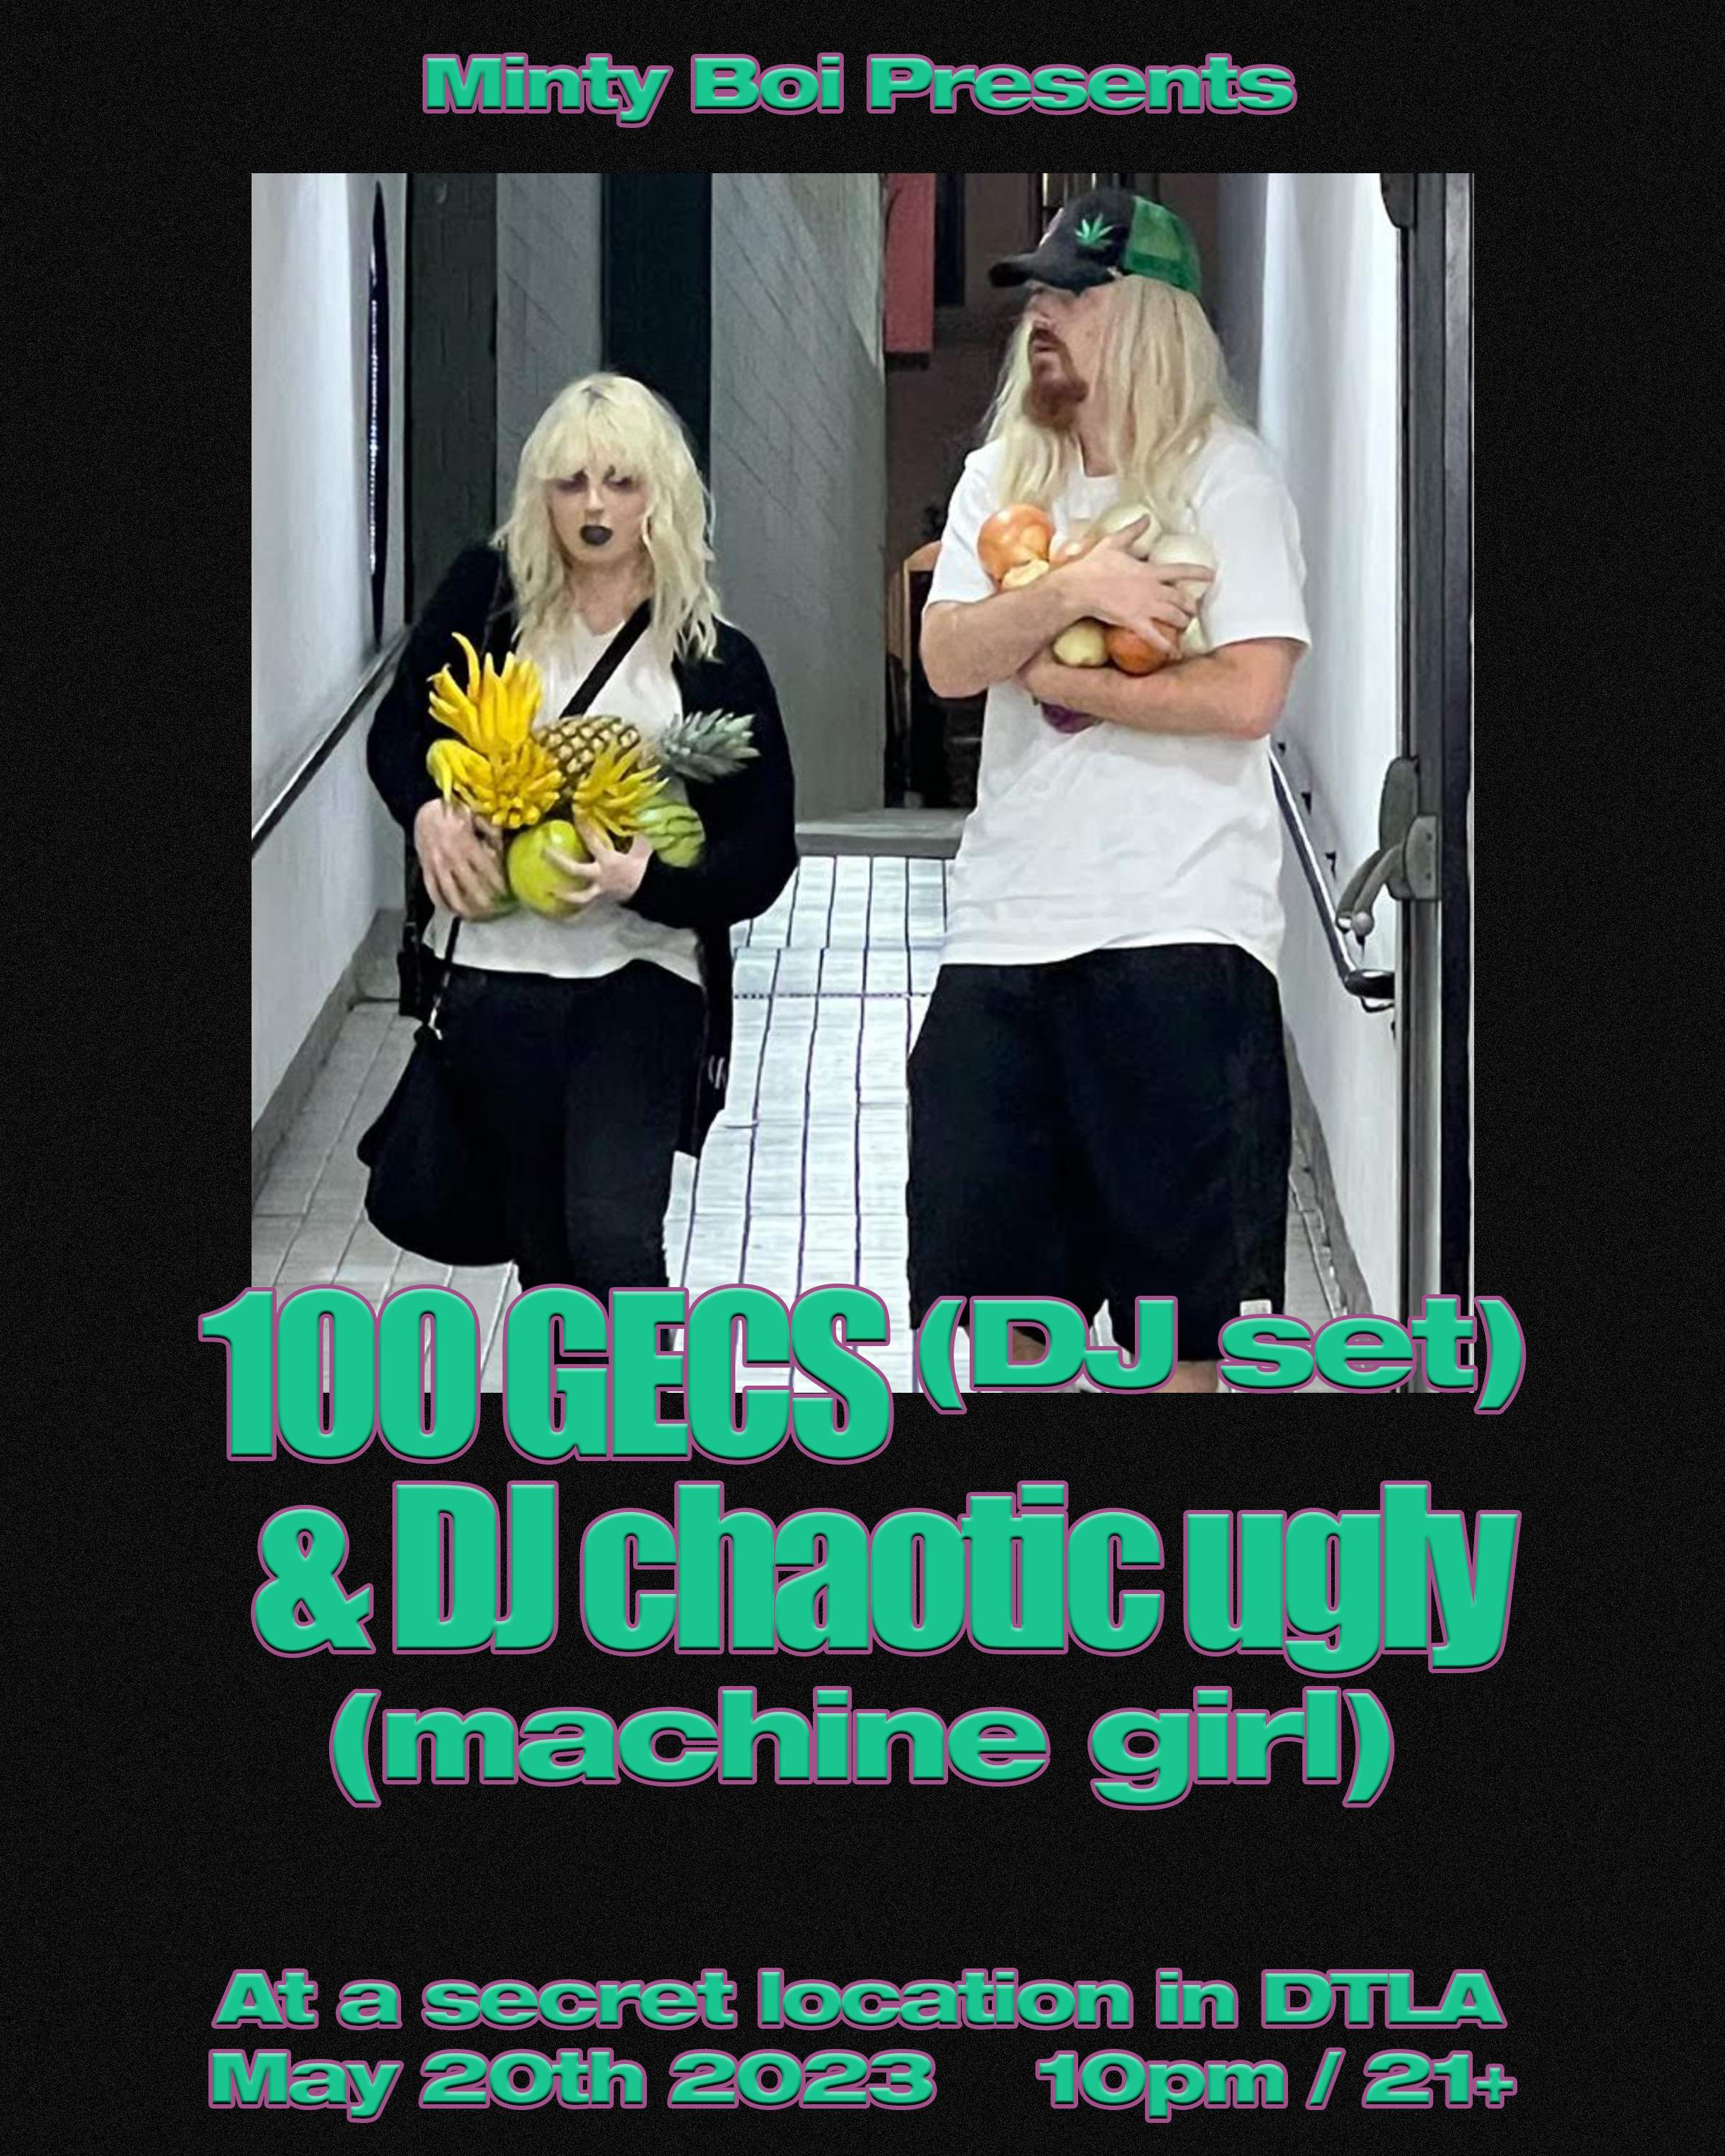 100 gecs (dj set) + DJ CHAOTIC UGLY (Machine Girl) with Special Guest - Página frontal